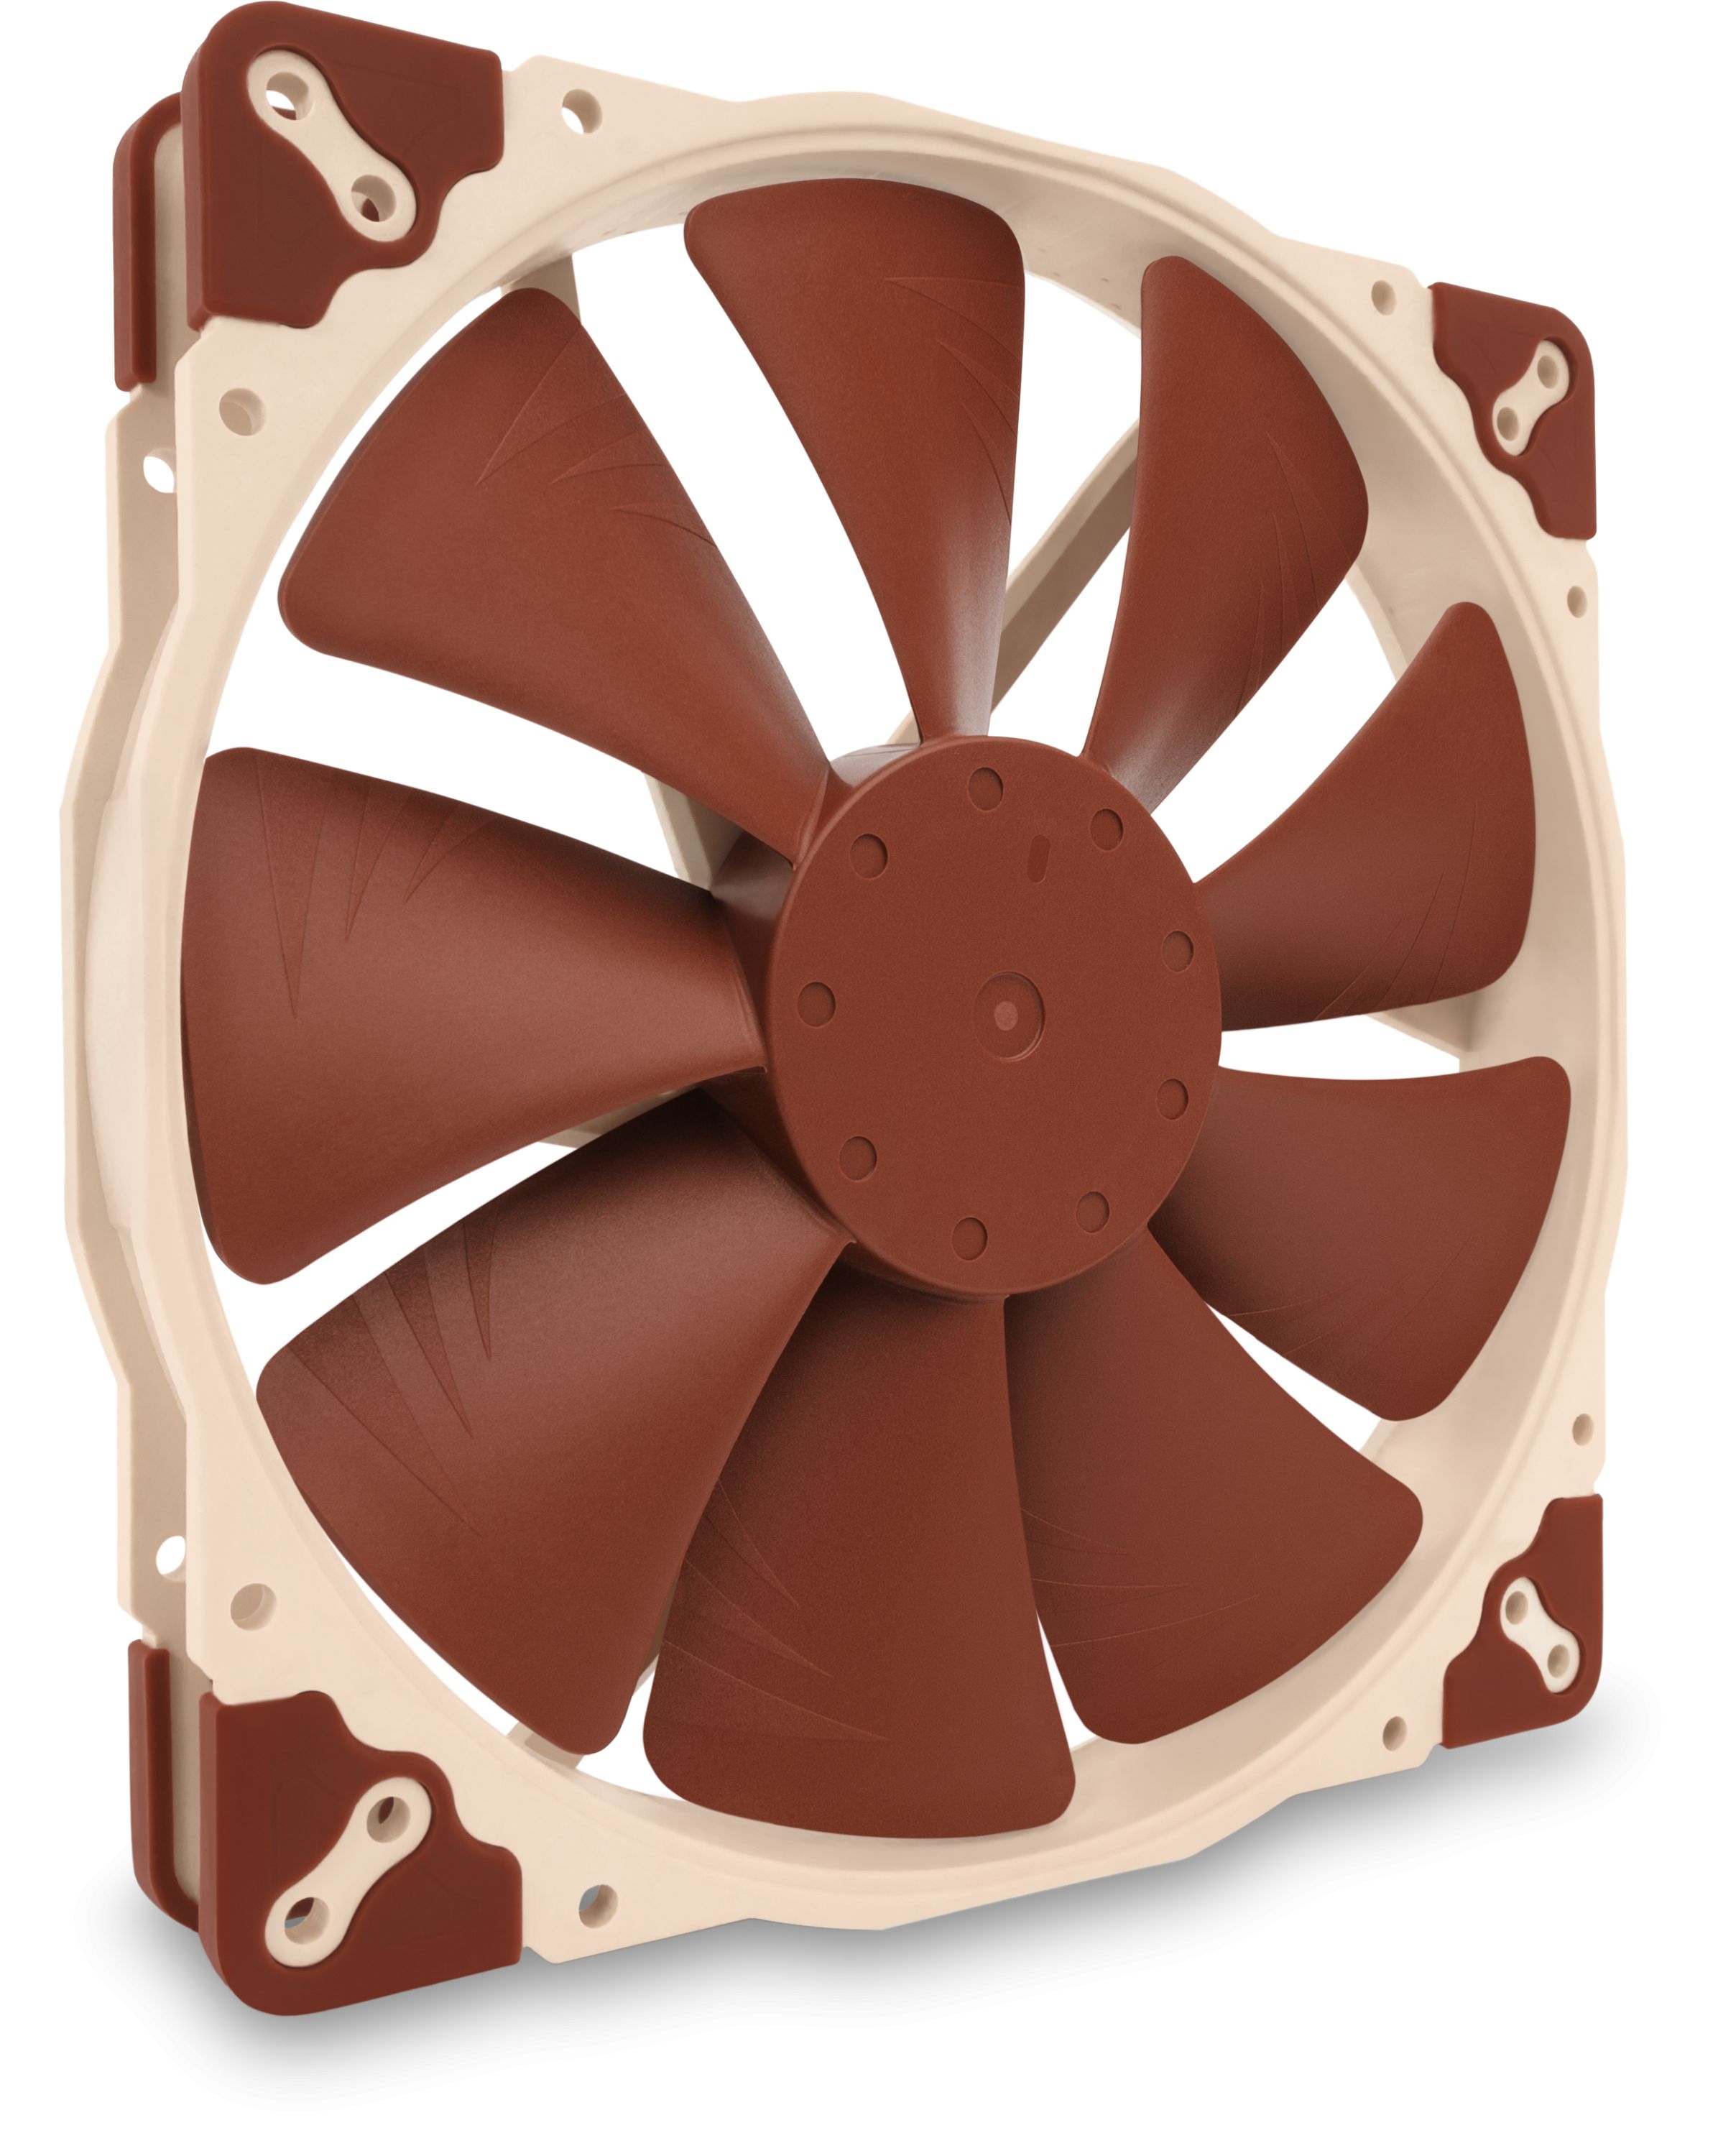 NF-A20 Extra Large Quiet Fan